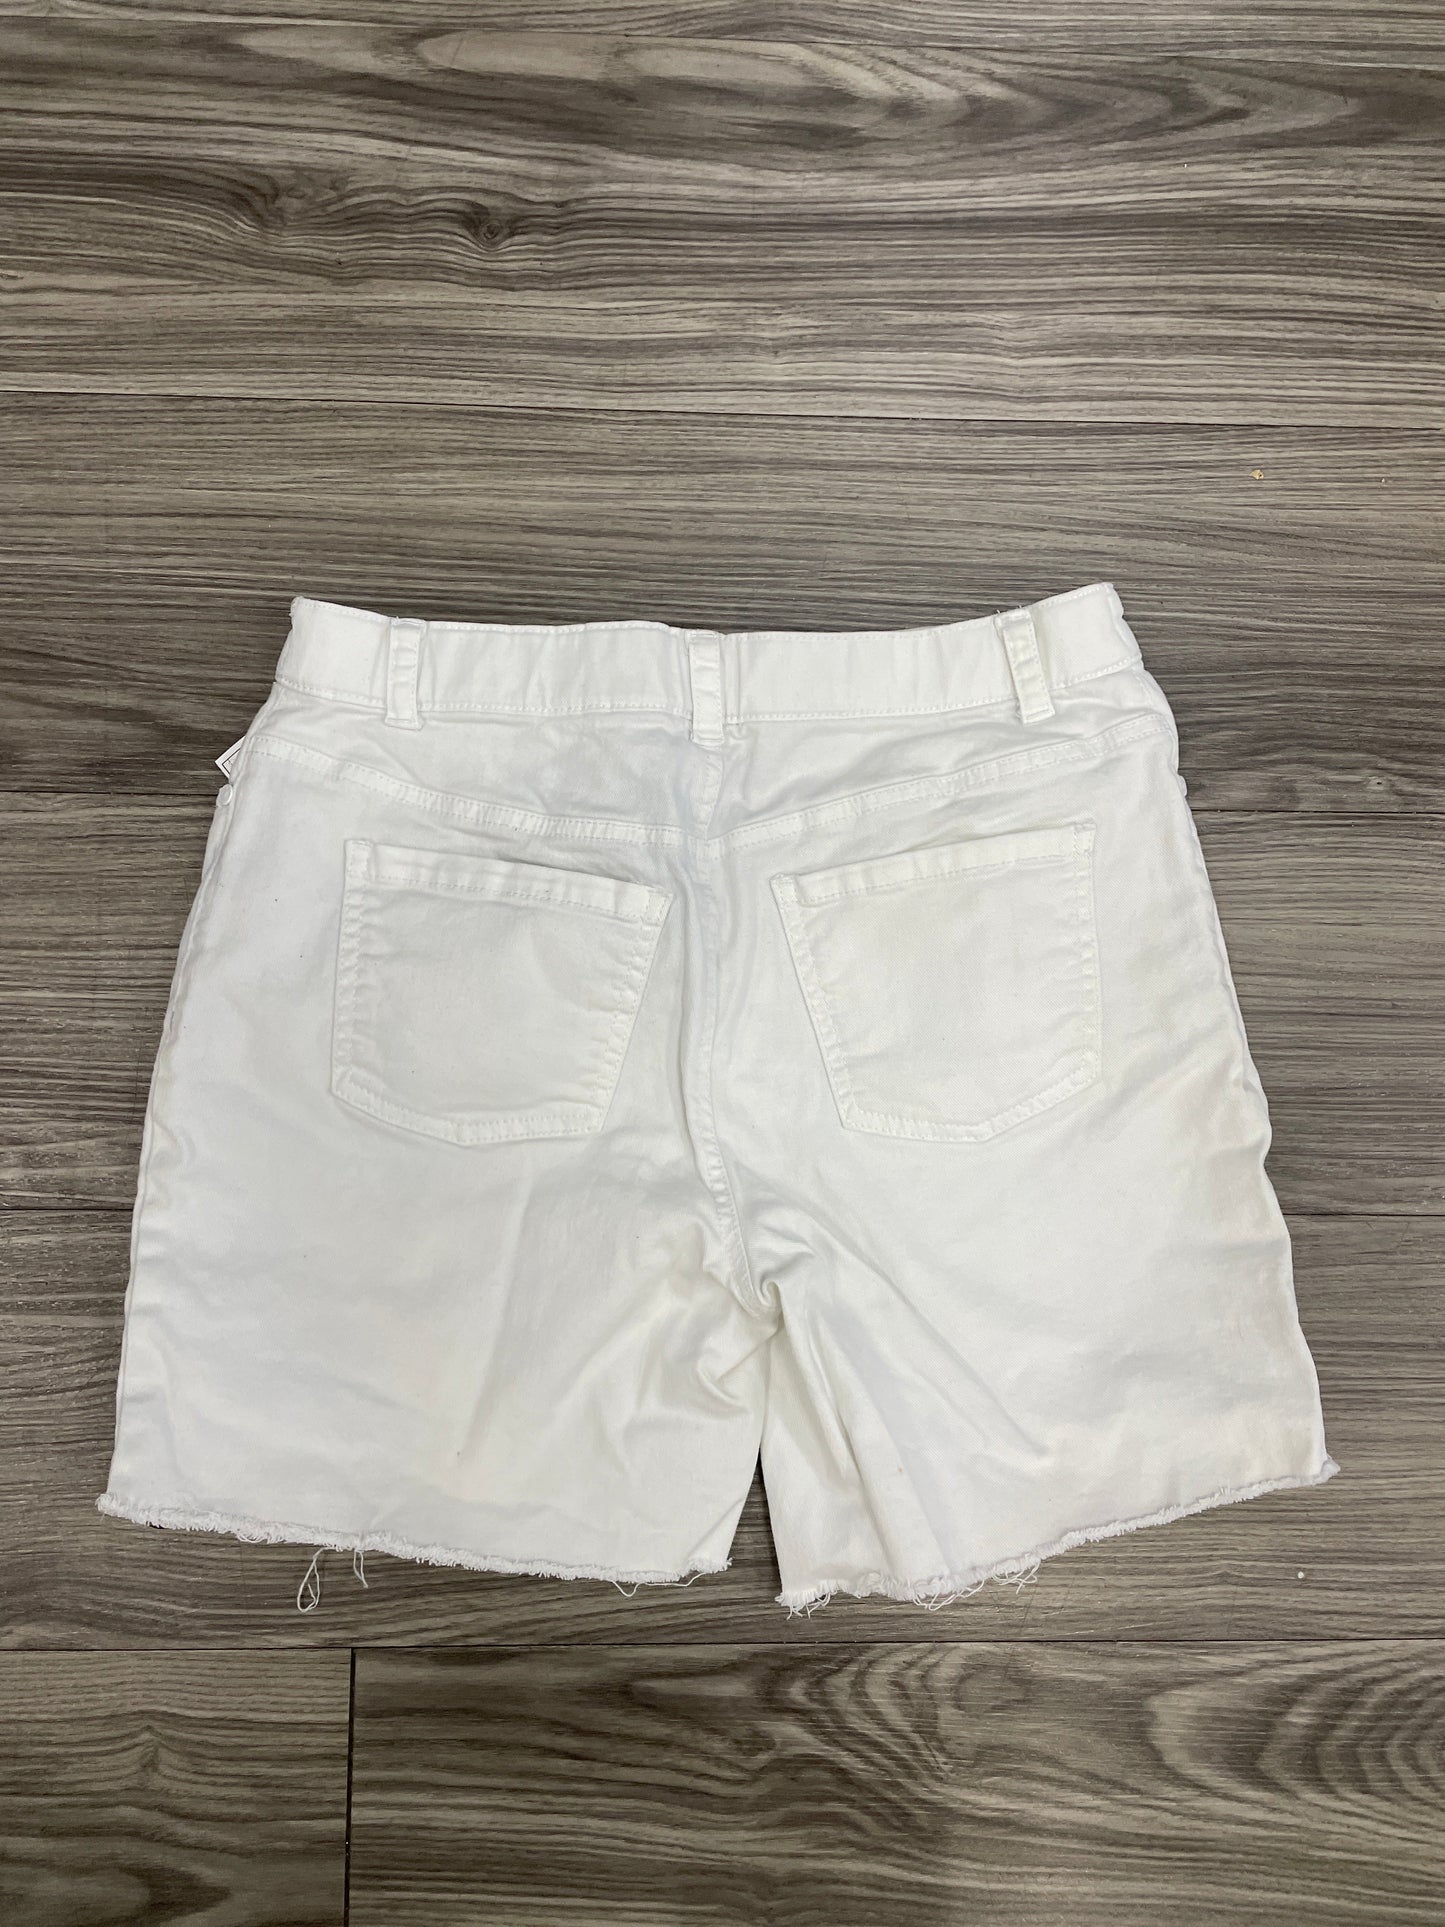 Shorts By Croft And Barrow  Size: 6